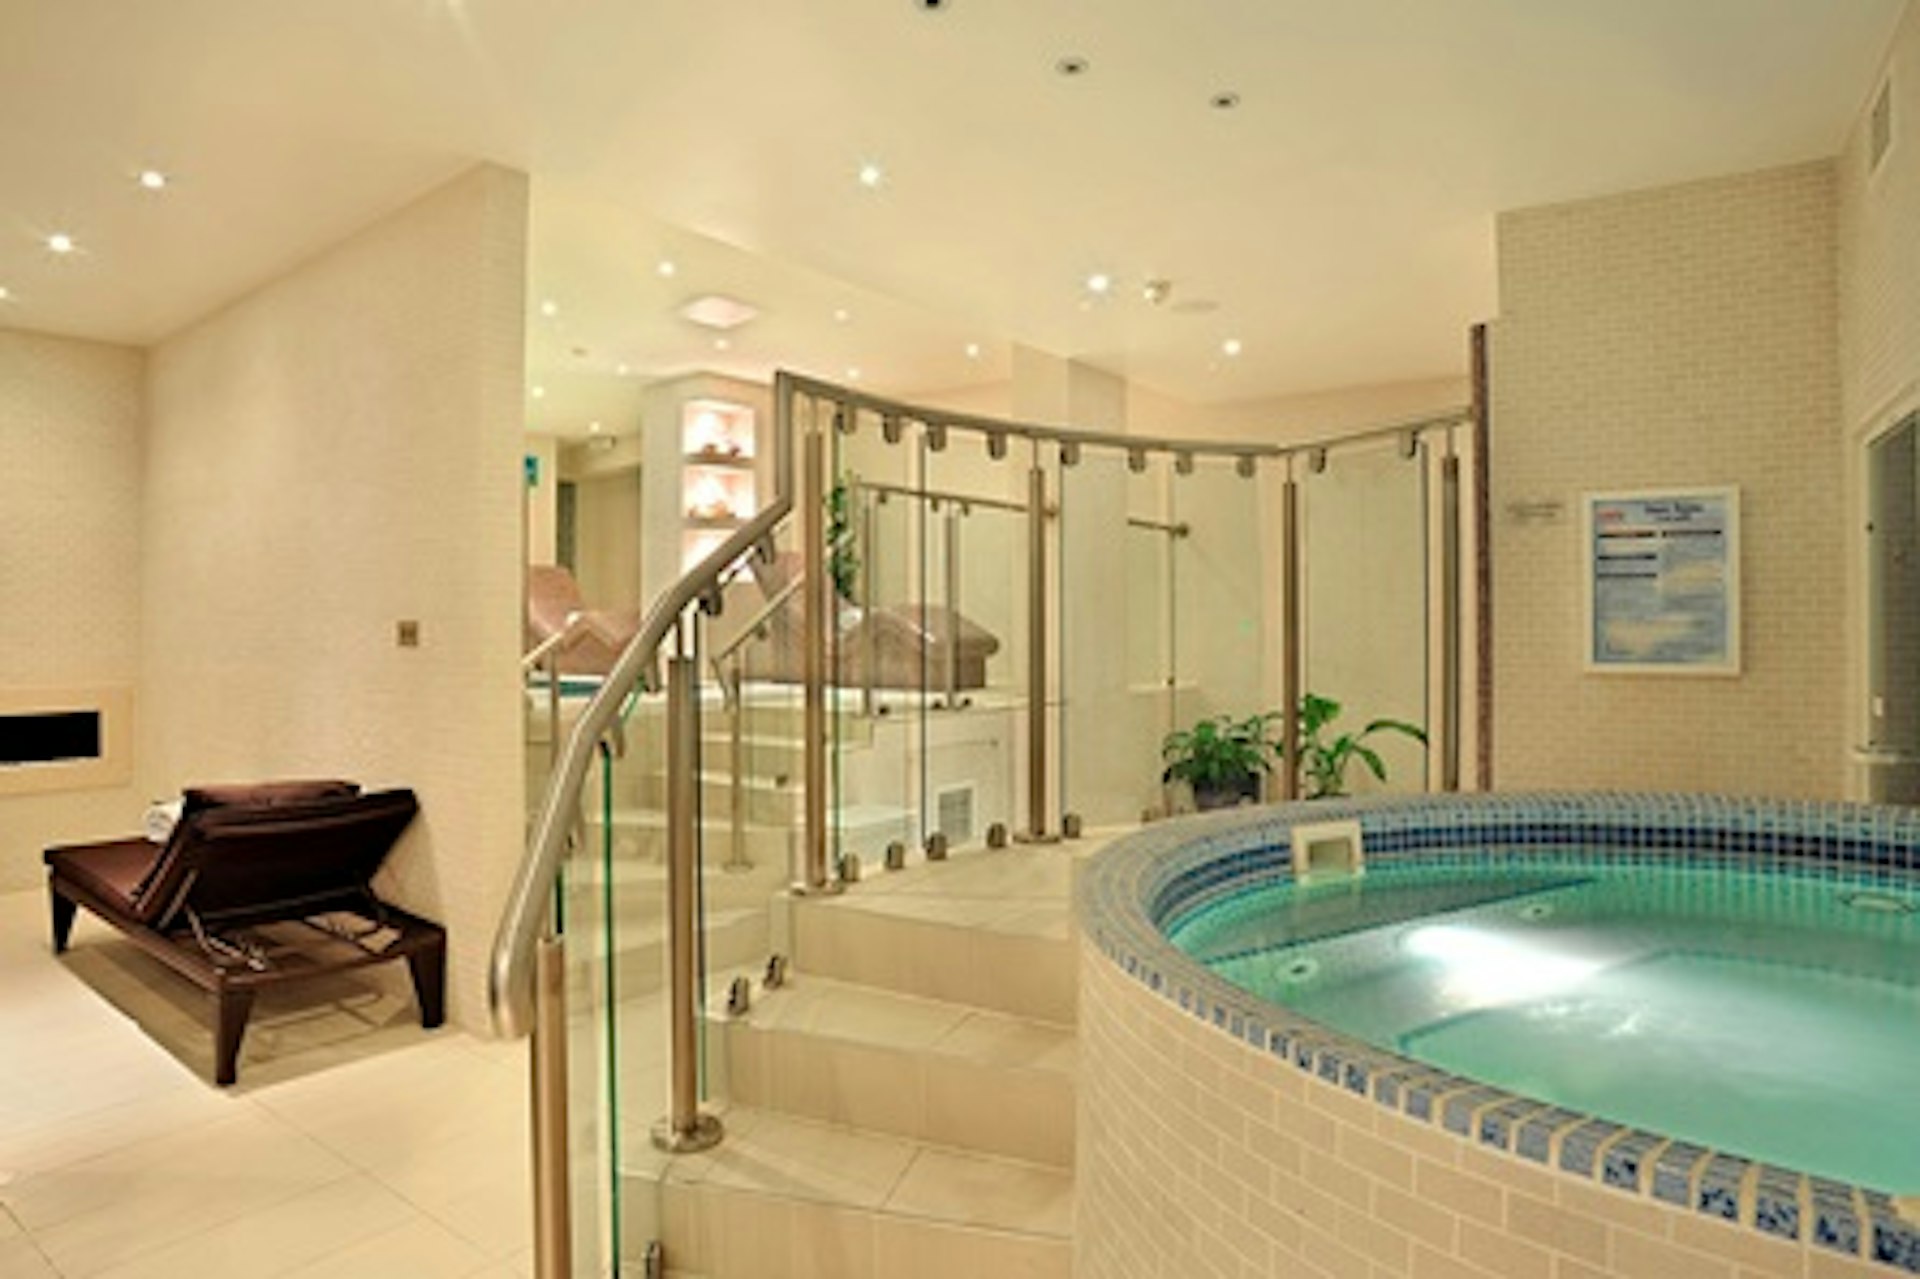 Weekend Spa Relaxation with Treatment and Prosecco for Two at the 5* Montcalm Hotel, London 3